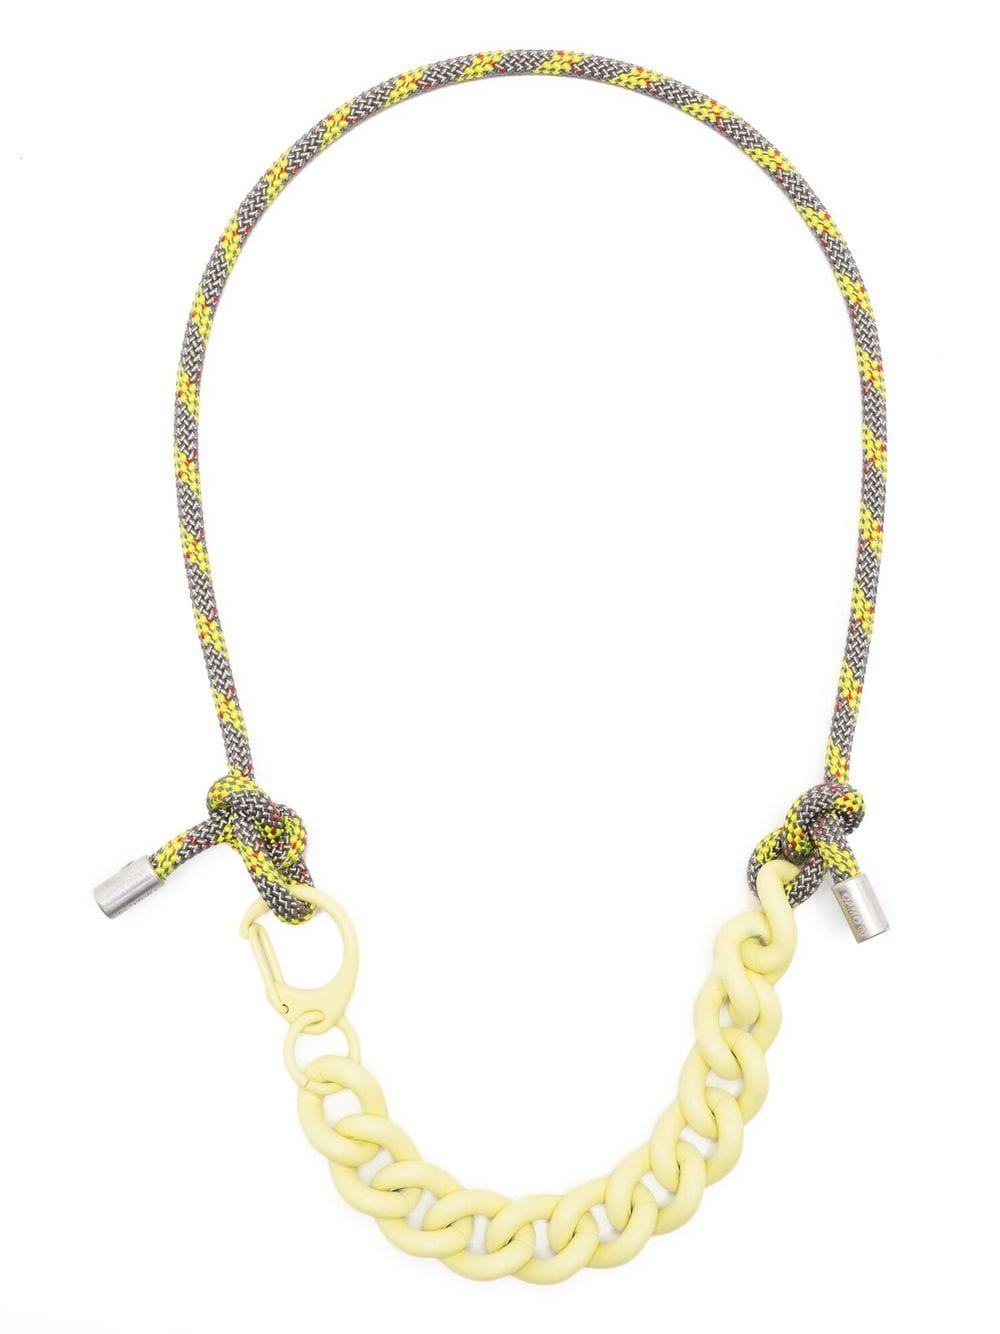 OAMC chain rope necklace - Yellow von OAMC